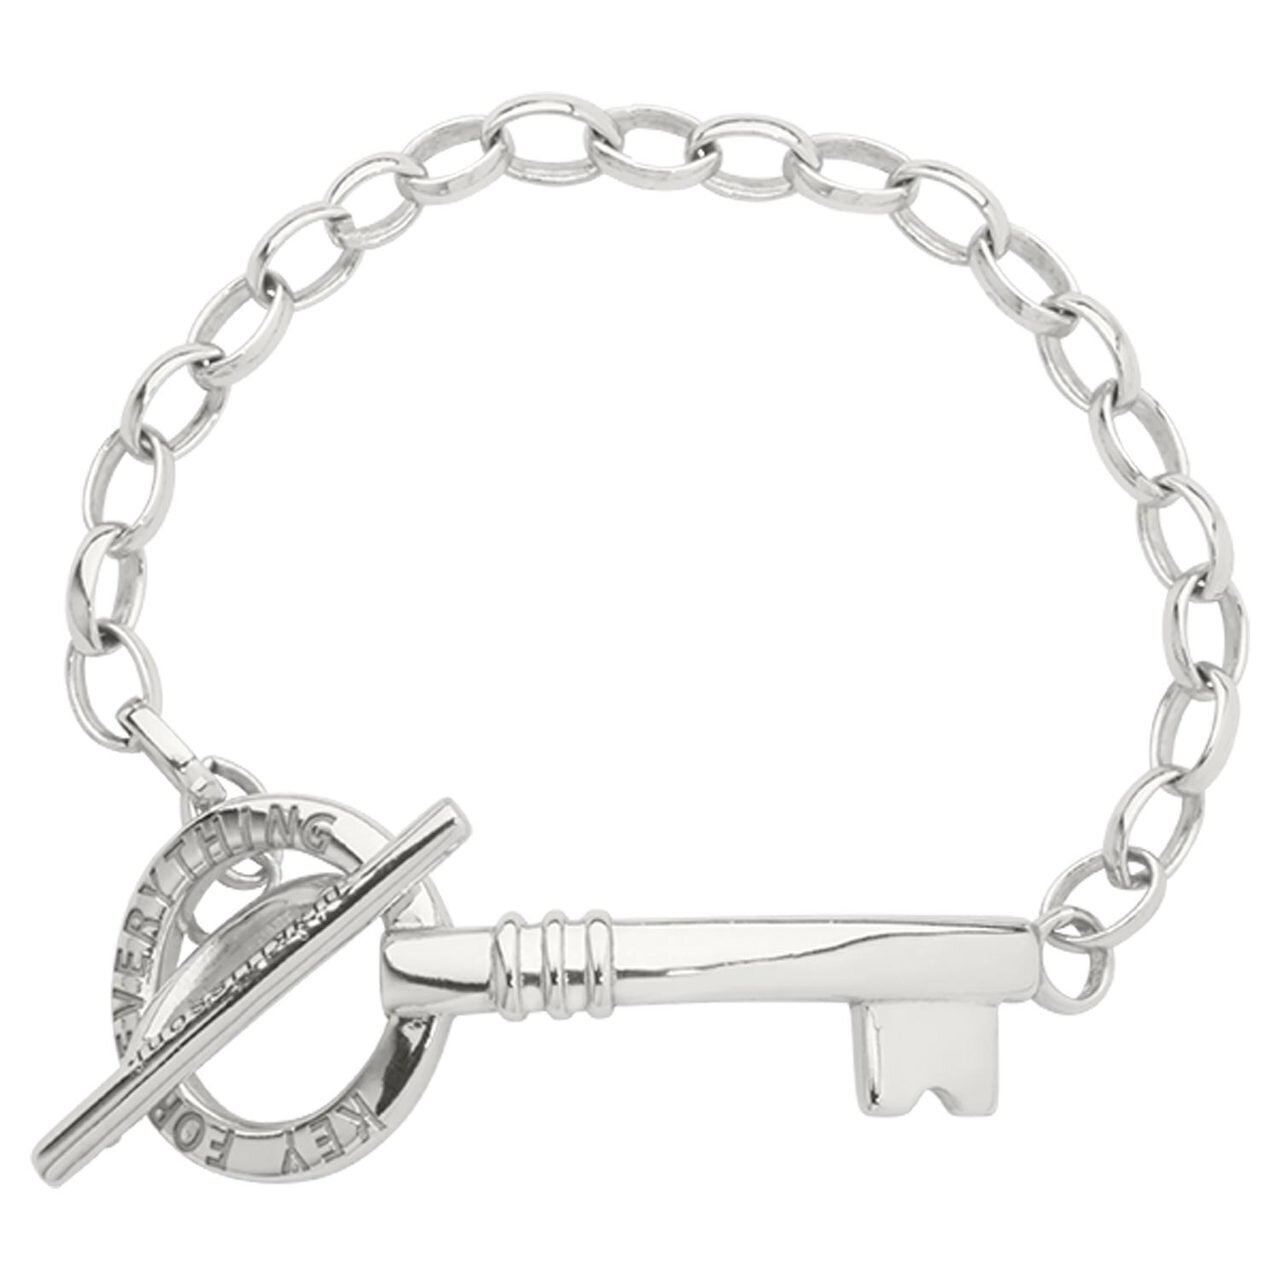 Nikki Lissoni Key To Everything Bracelet with T-Bar Closure Silver-plated 21cm B1133S21